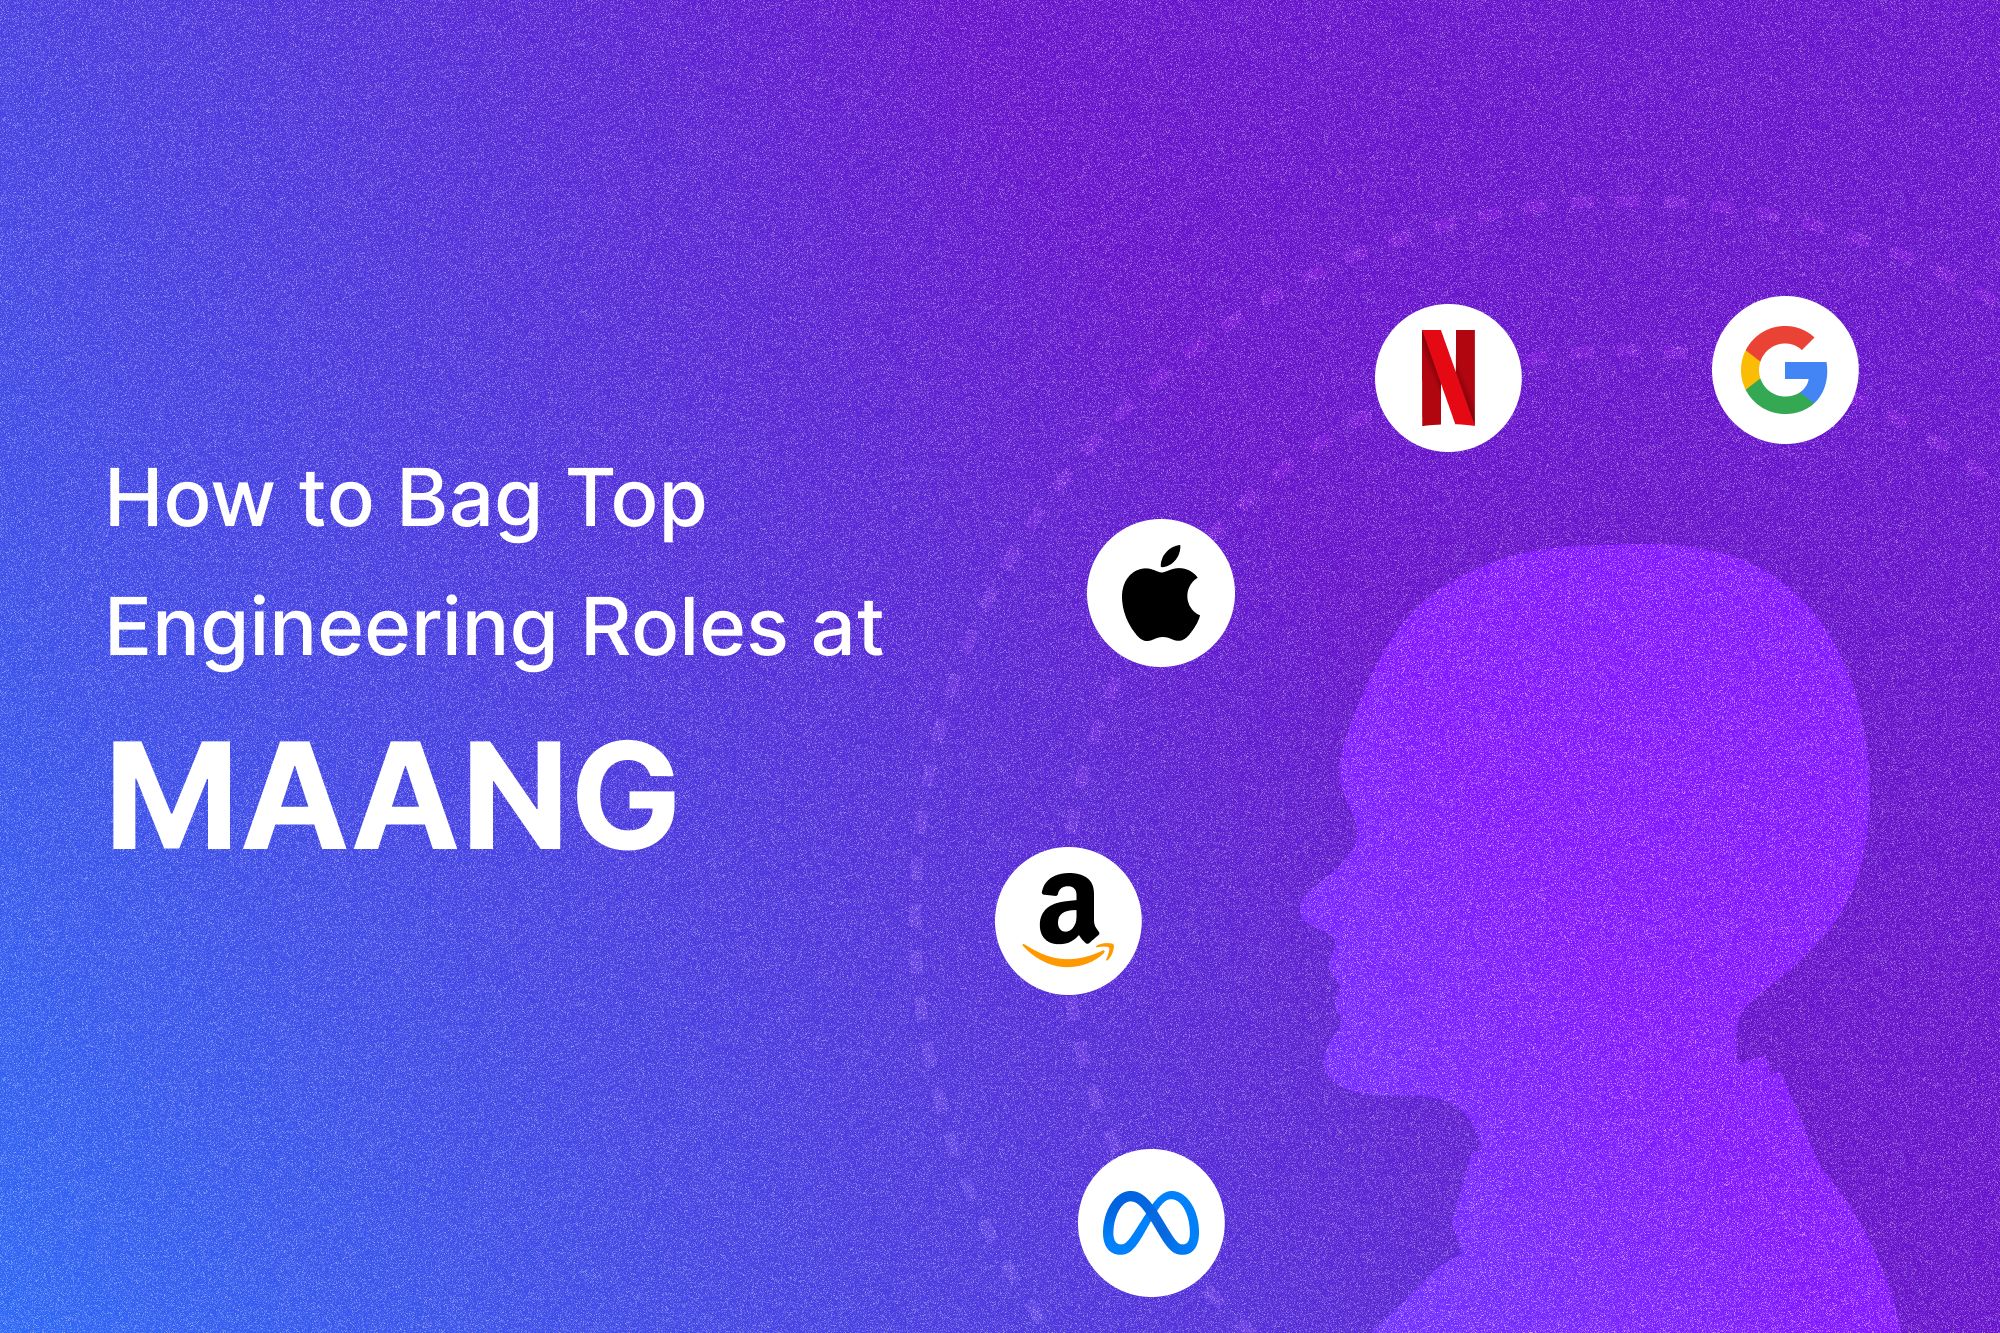 How to Bag Top Engineering Roles at MAANG